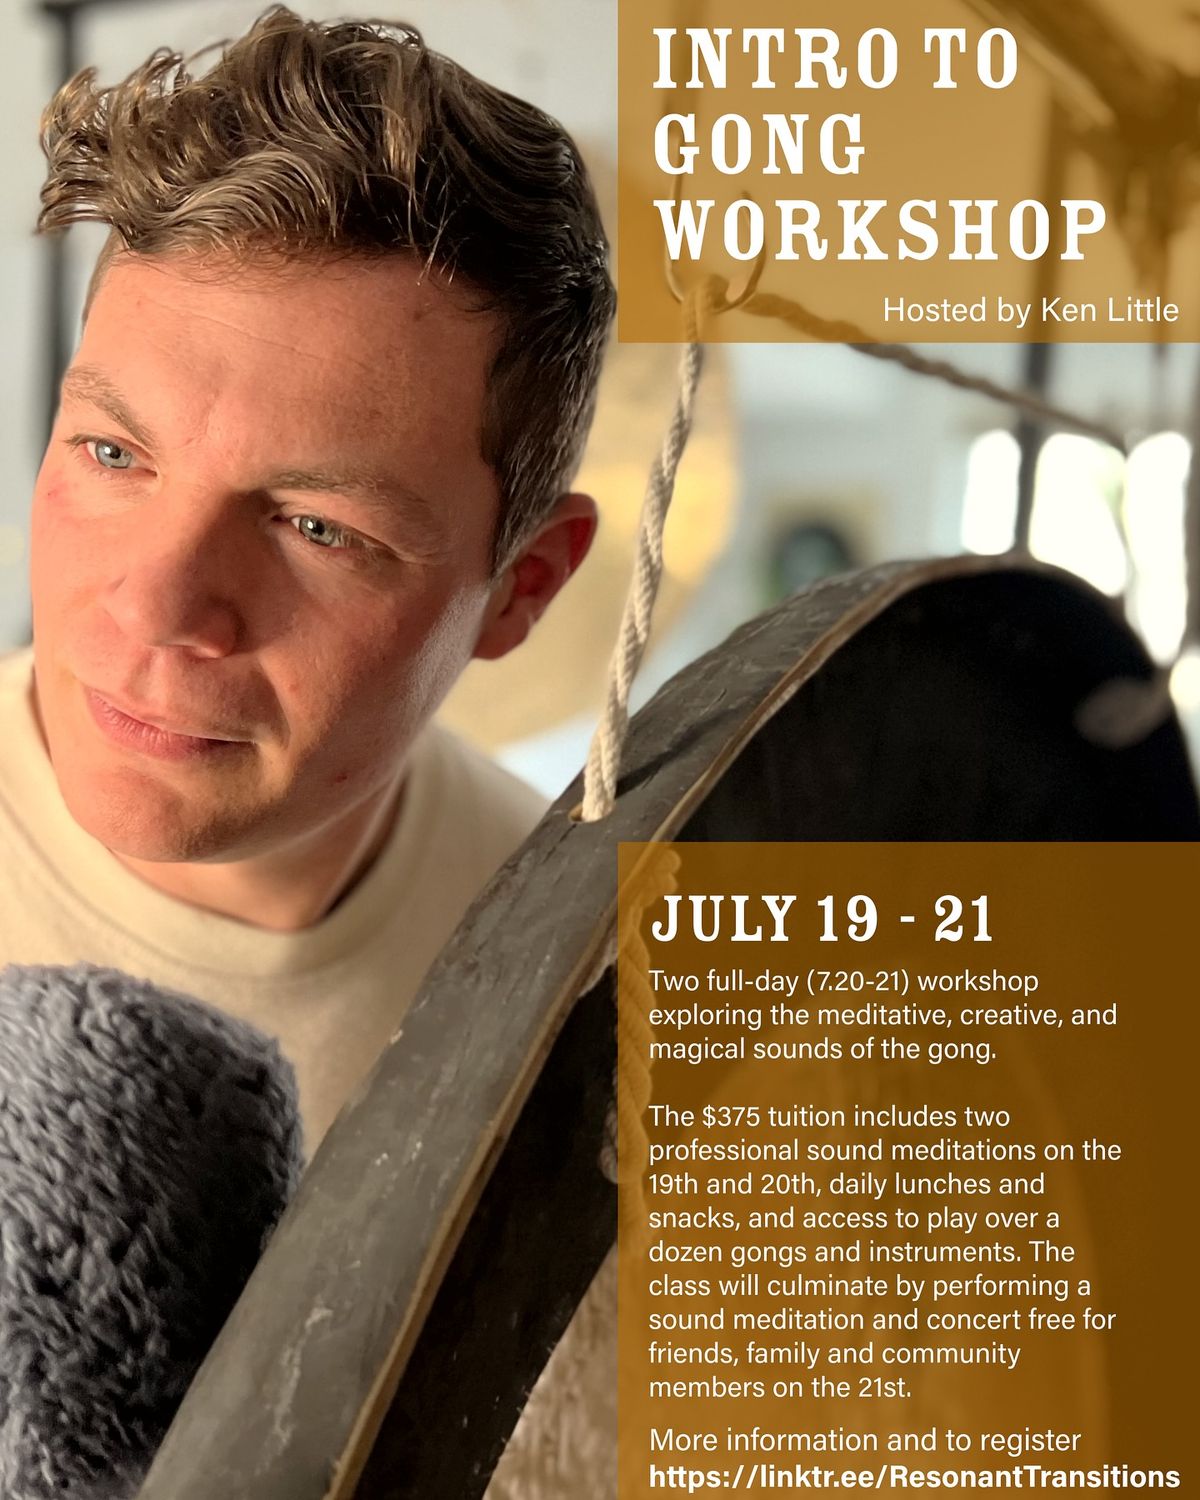 Intro to Gong Workshop